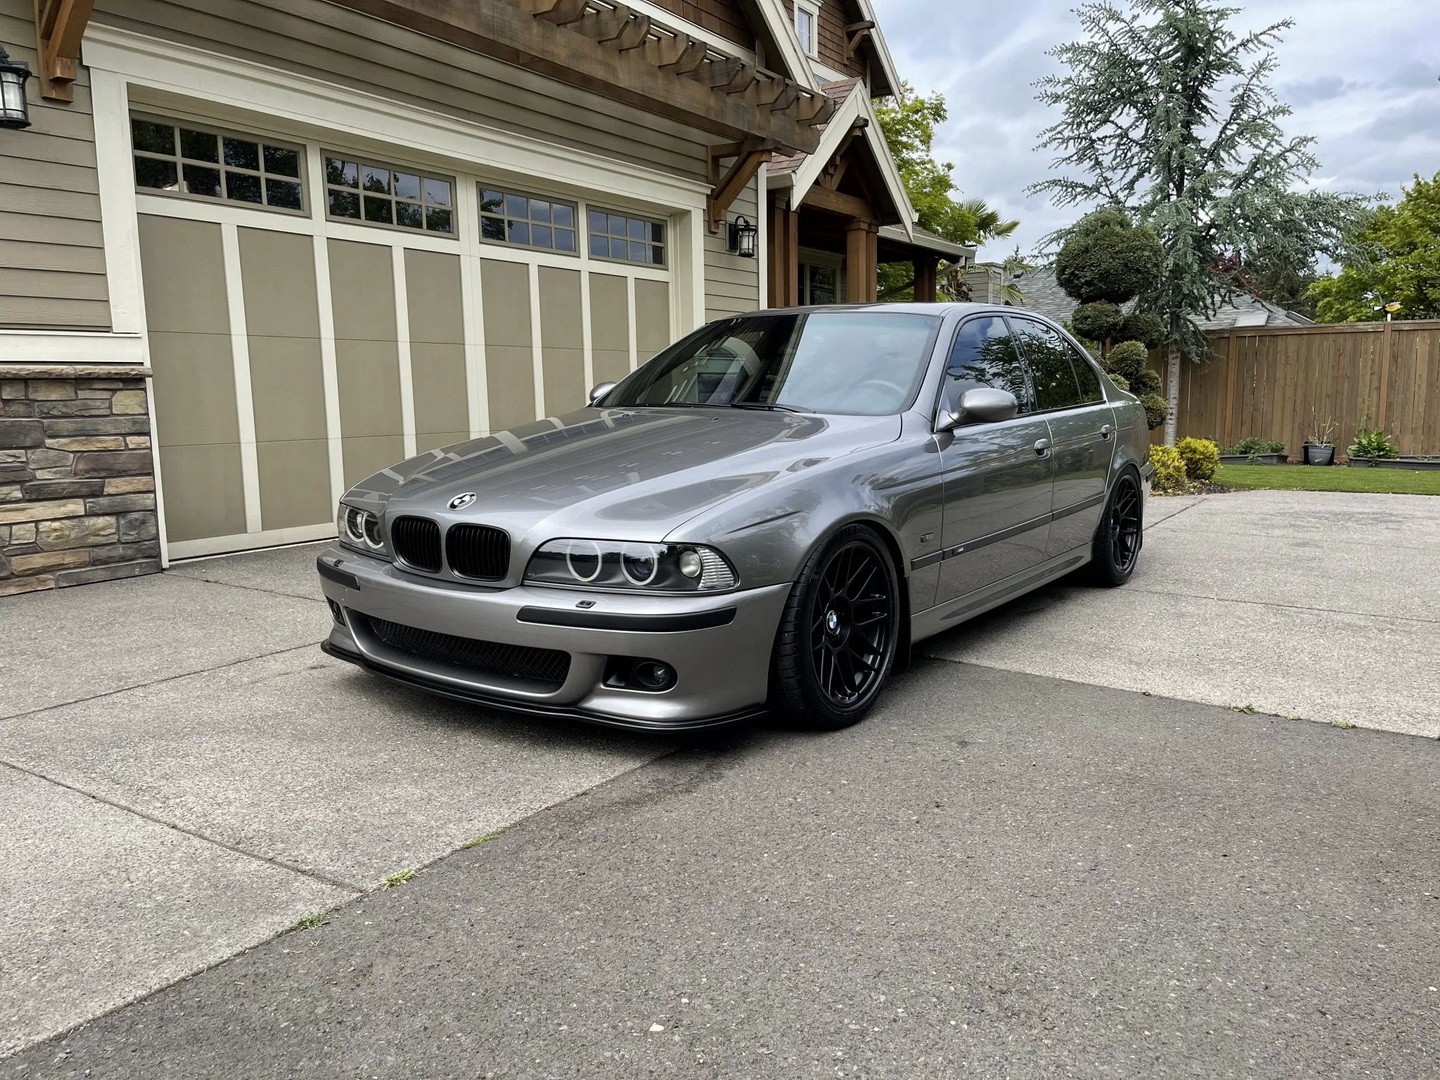 BMWBLOG Bids -- 2002 BMW E39 M5 with Dinan Mods from EAG